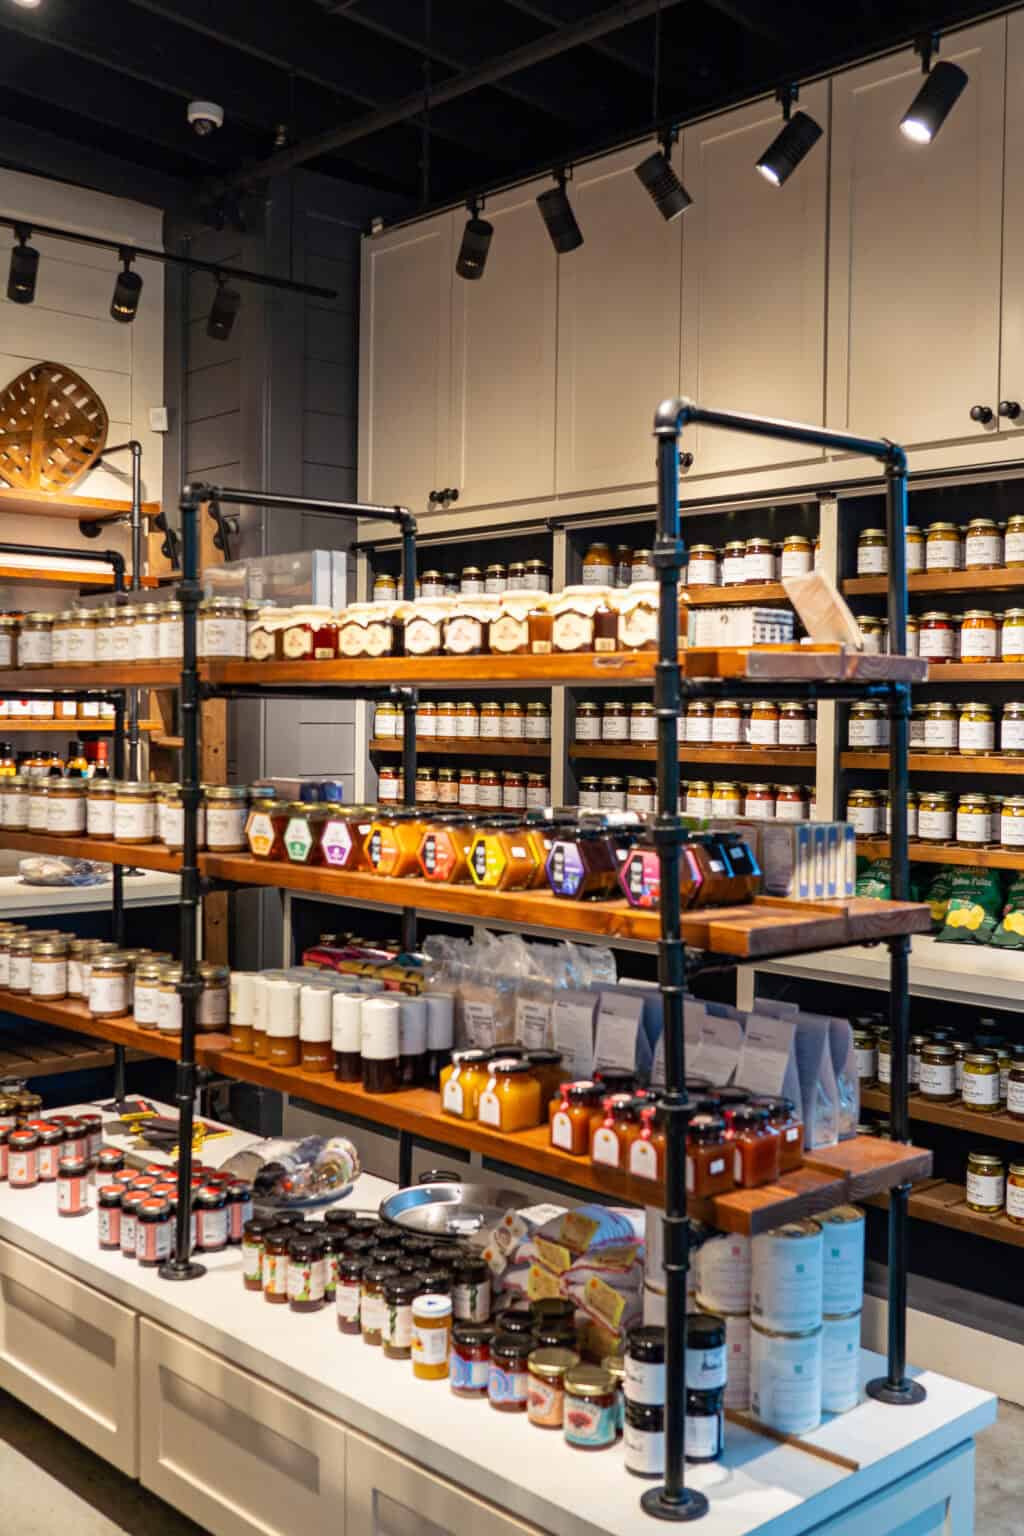 shelves with jars and containers